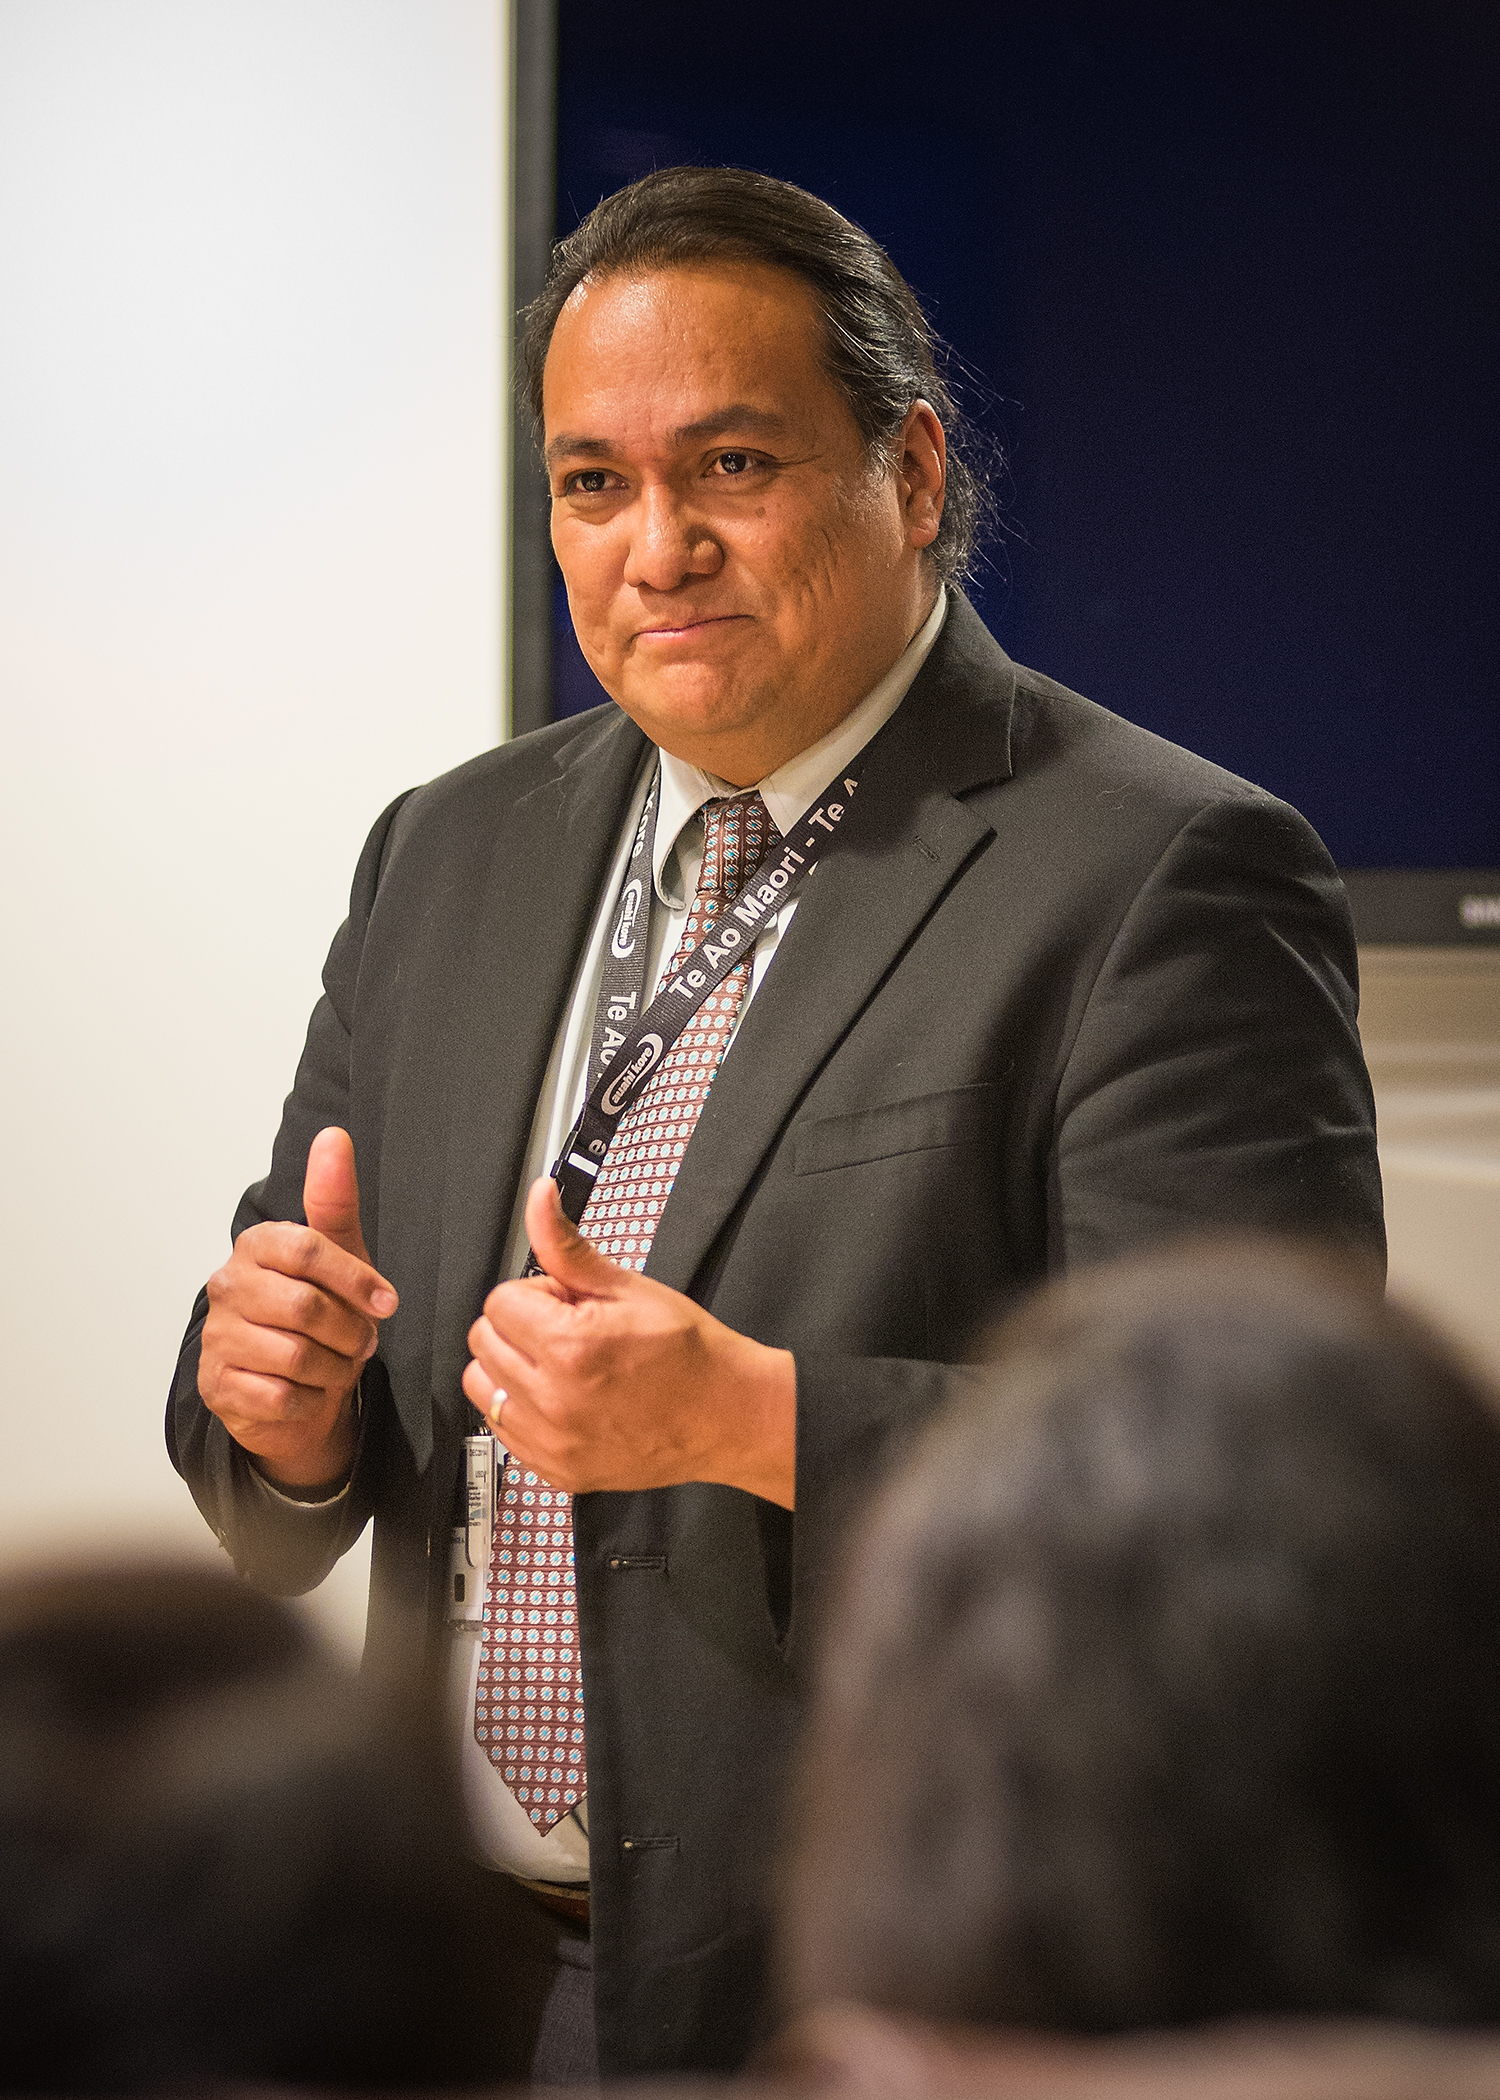 a man in a suit giving a talk